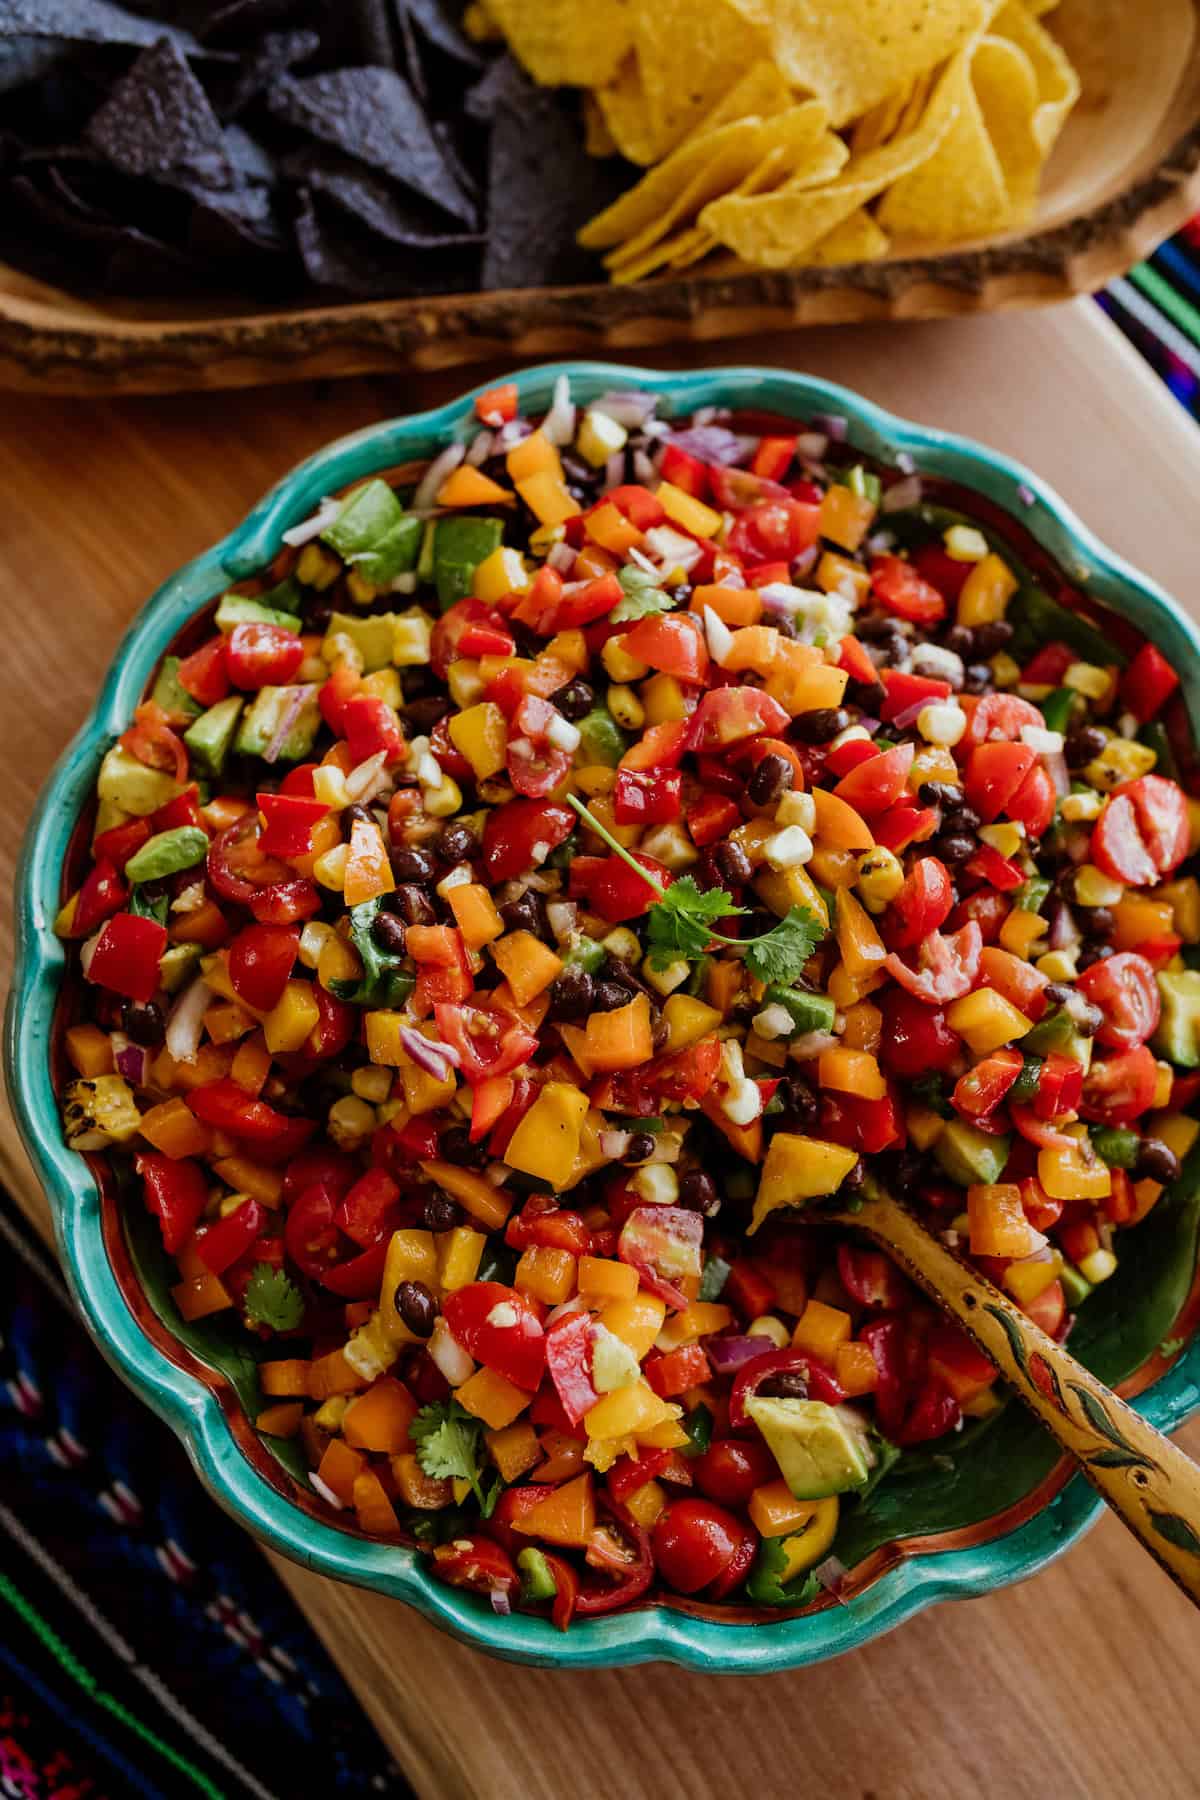 cowboy caviar in a teal bowl with wooden spoon served with blue and yellow corn chips.